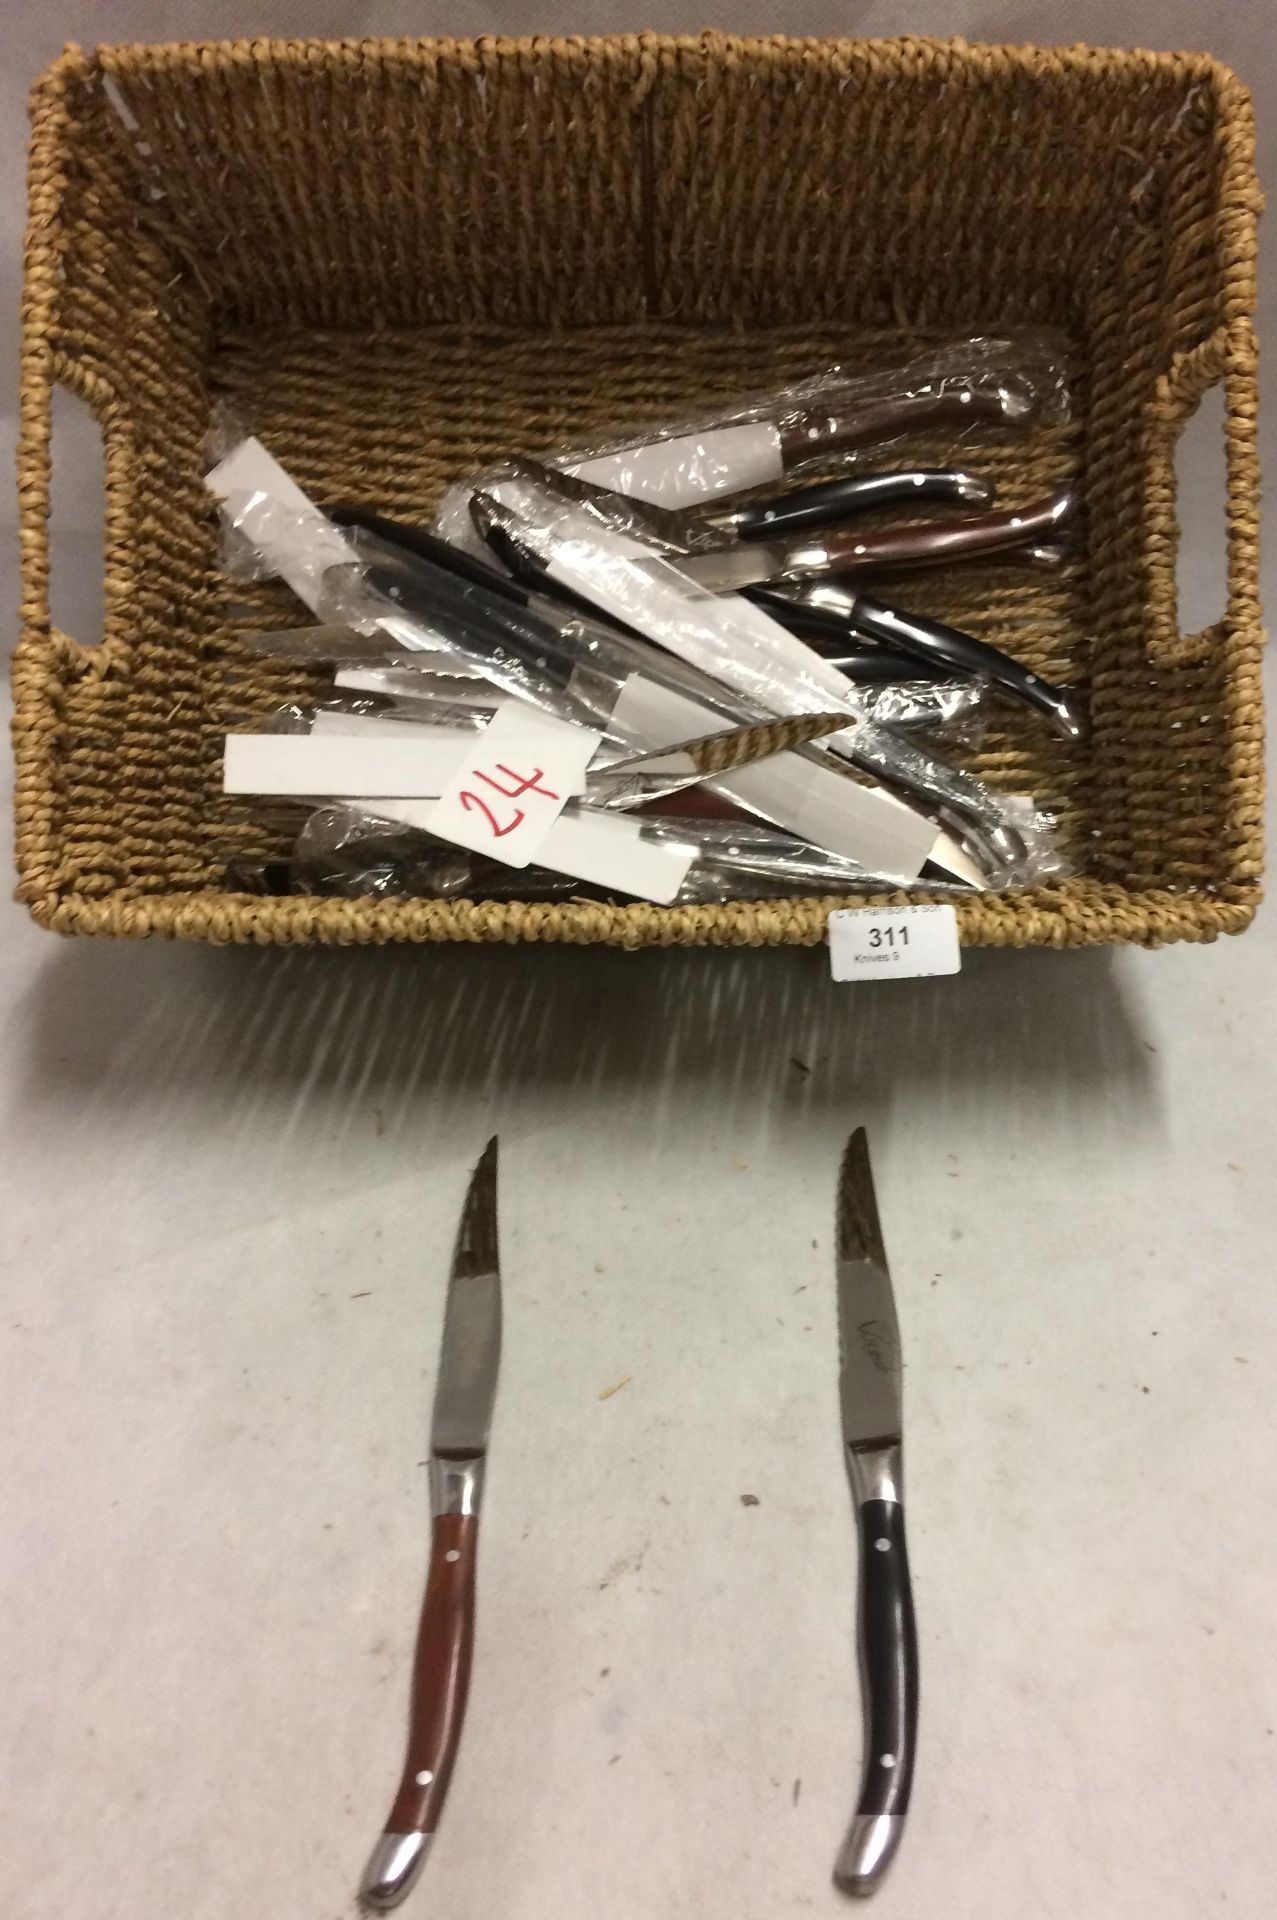 24 x Virgule steak and pizza knives with